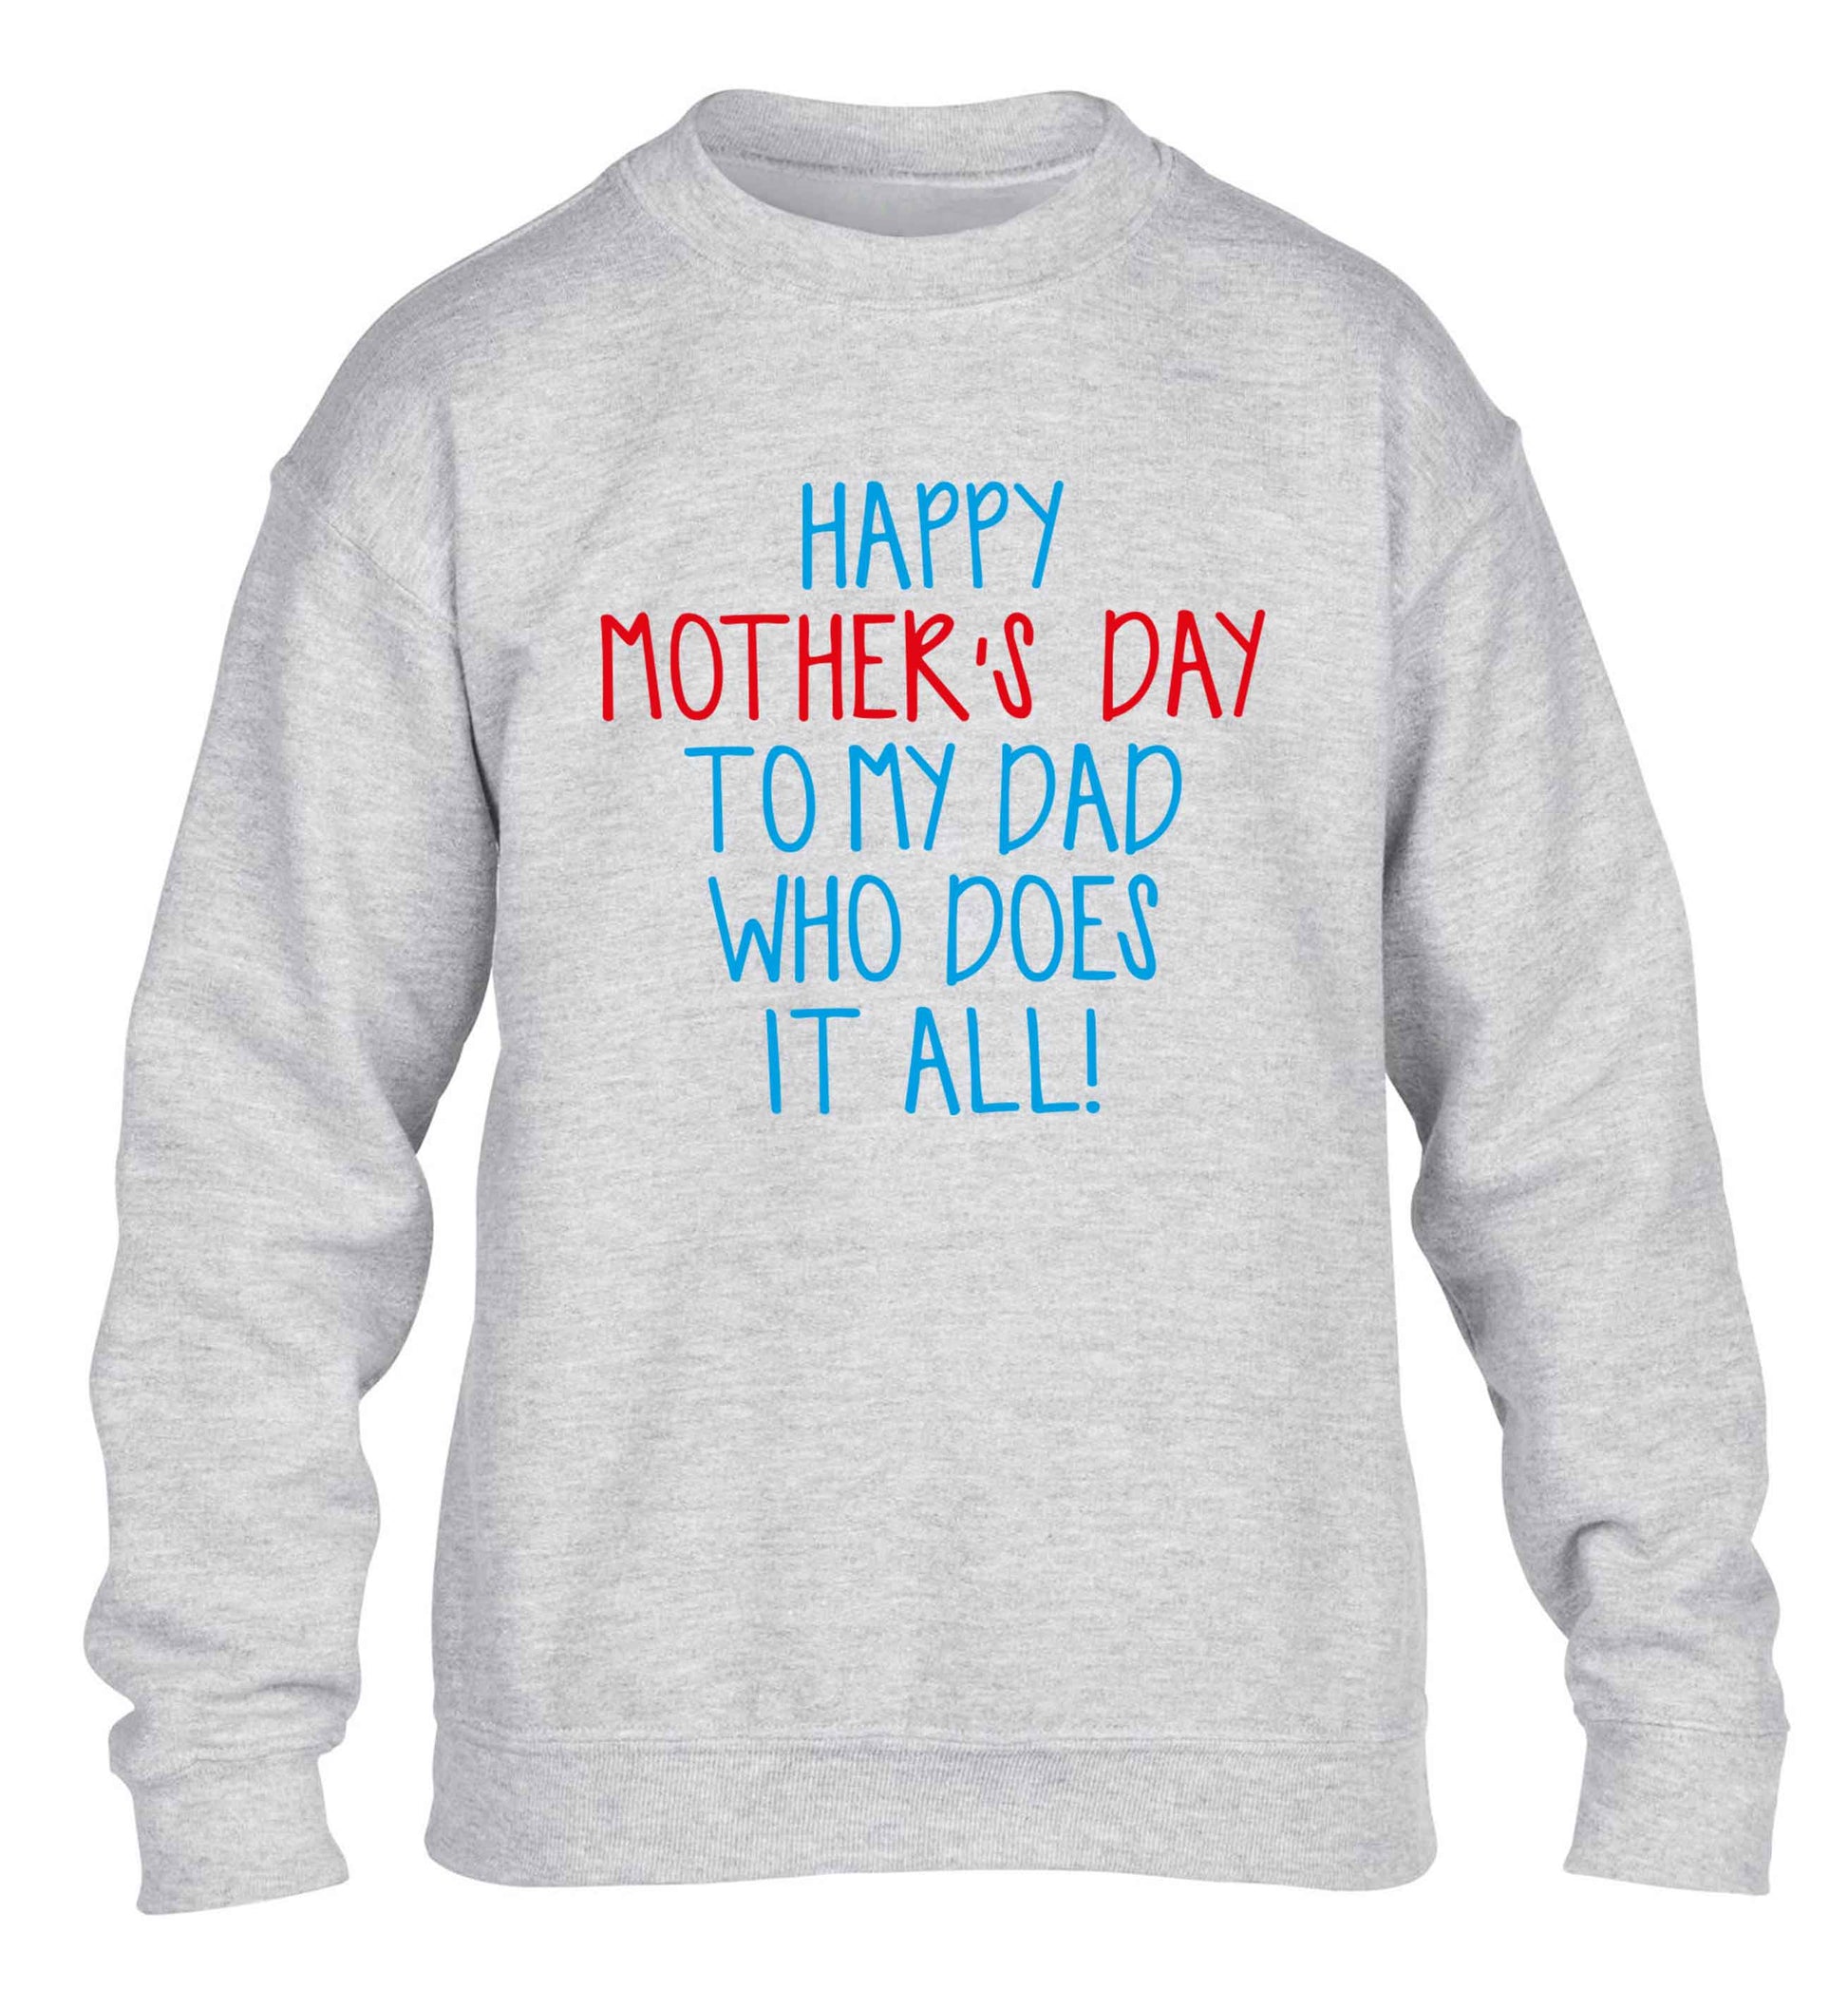 Happy mother's day to my dad who does it all! children's grey sweater 12-13 Years